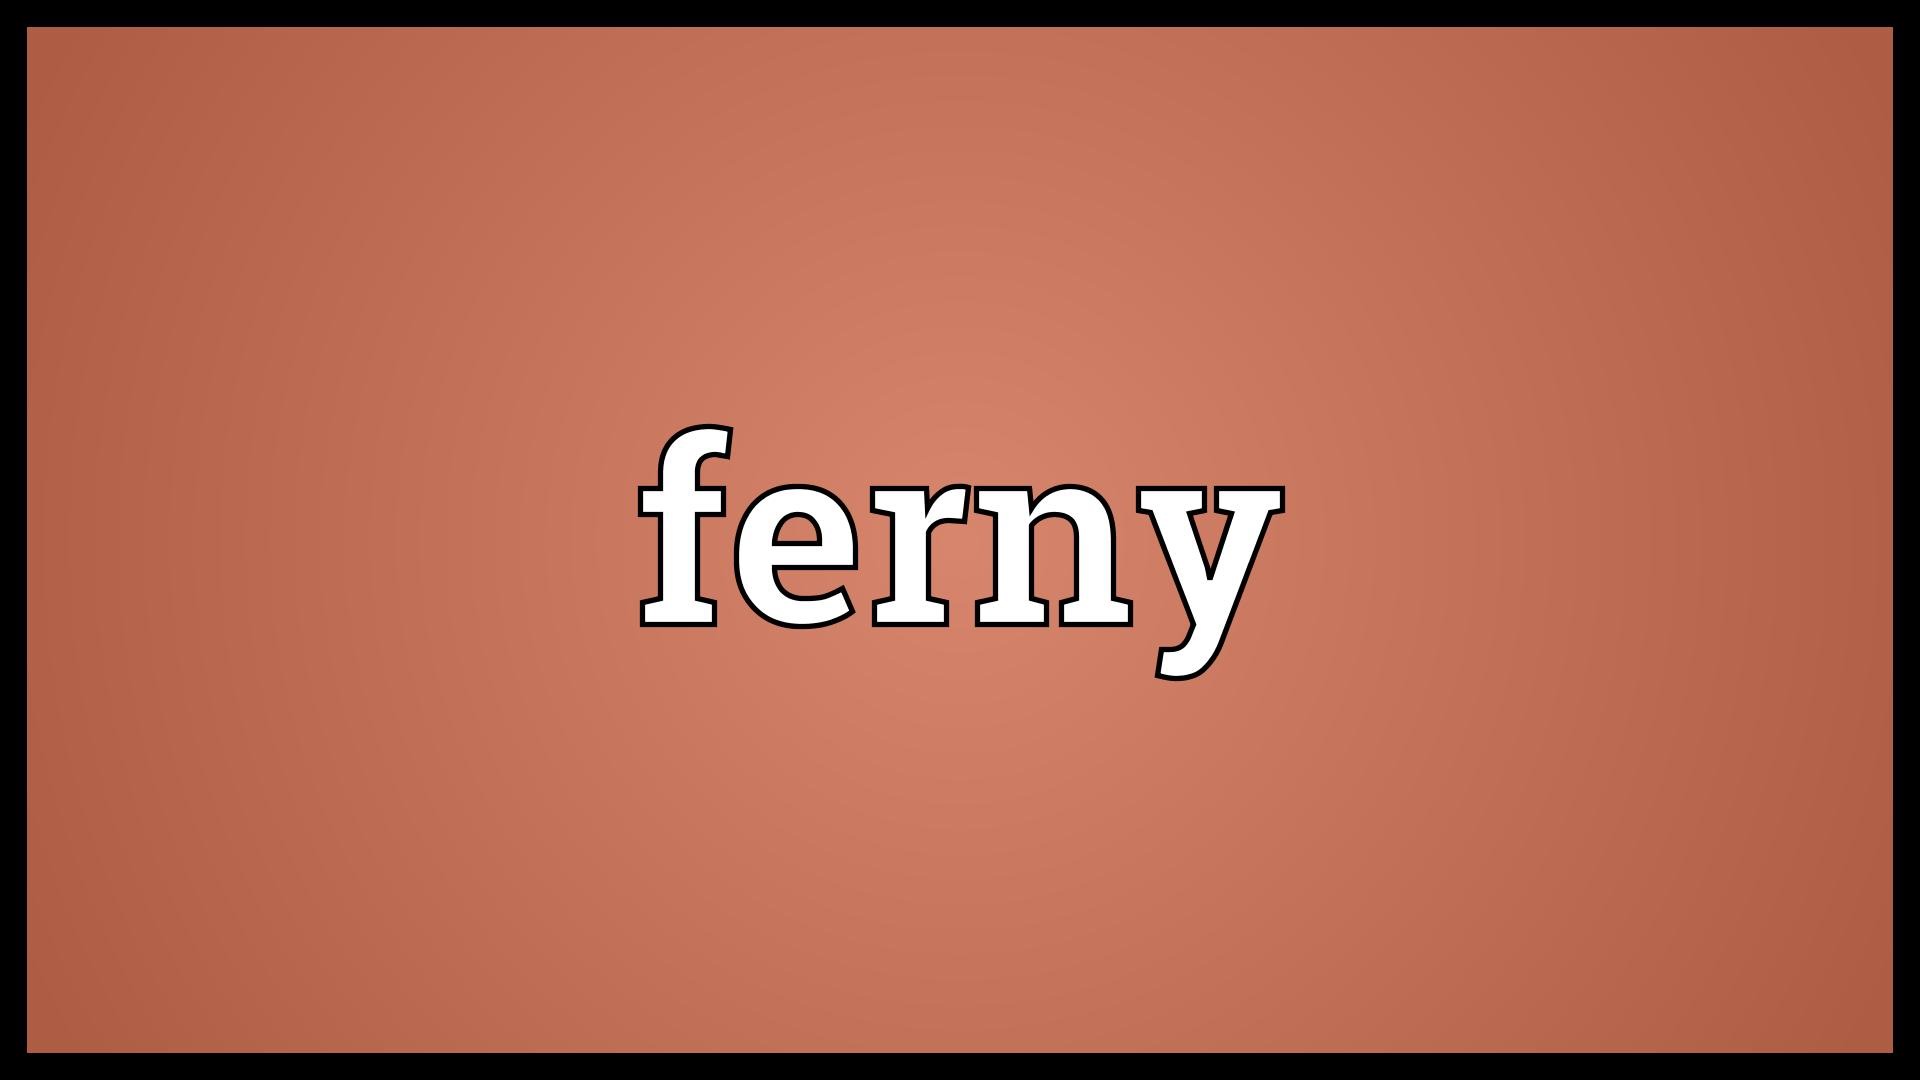 Ferny Meaning - YouTube